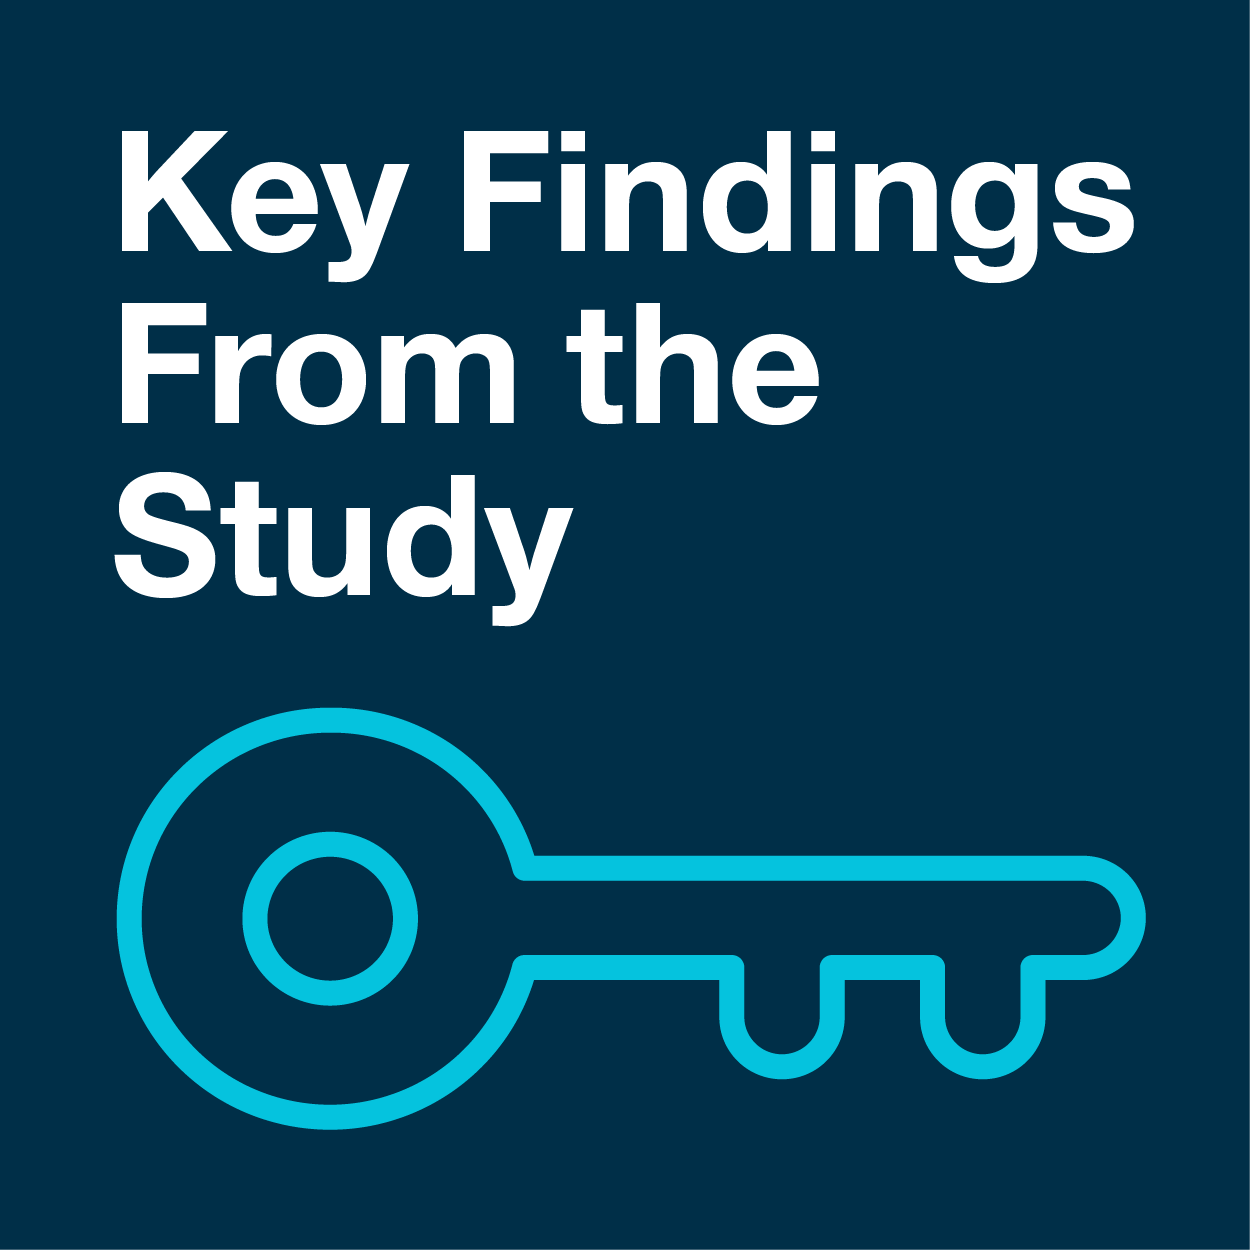 Key Findings from the Study